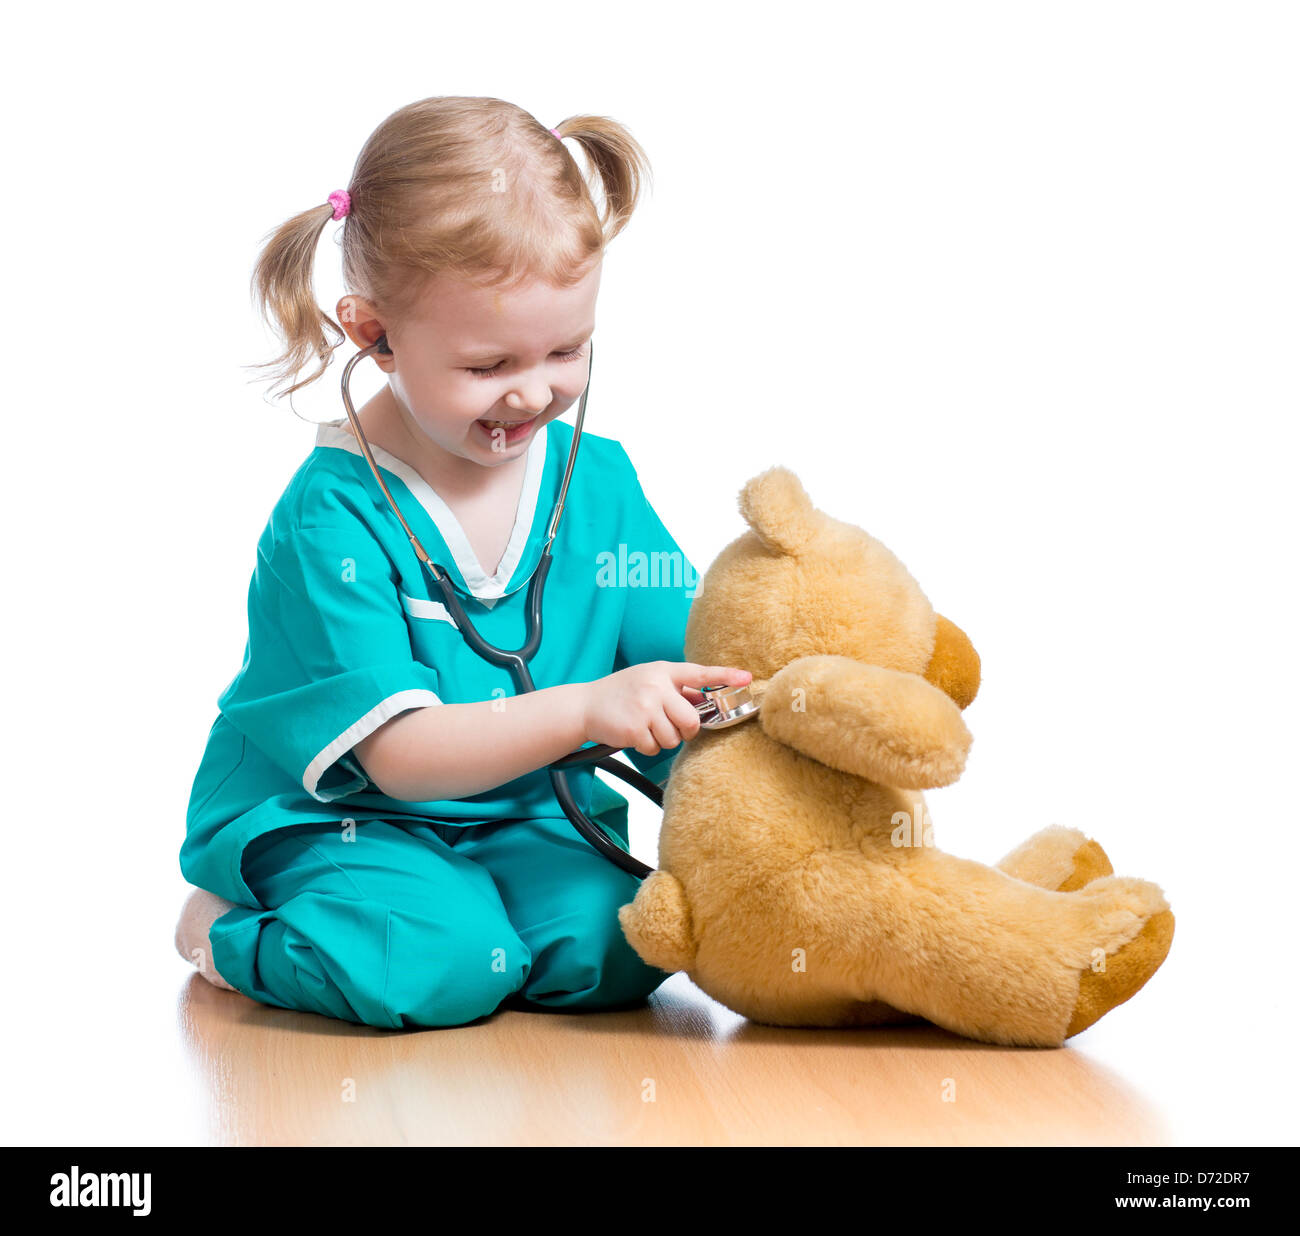 Adorable child with clothes of doctor playing with plush toy Stock Photo